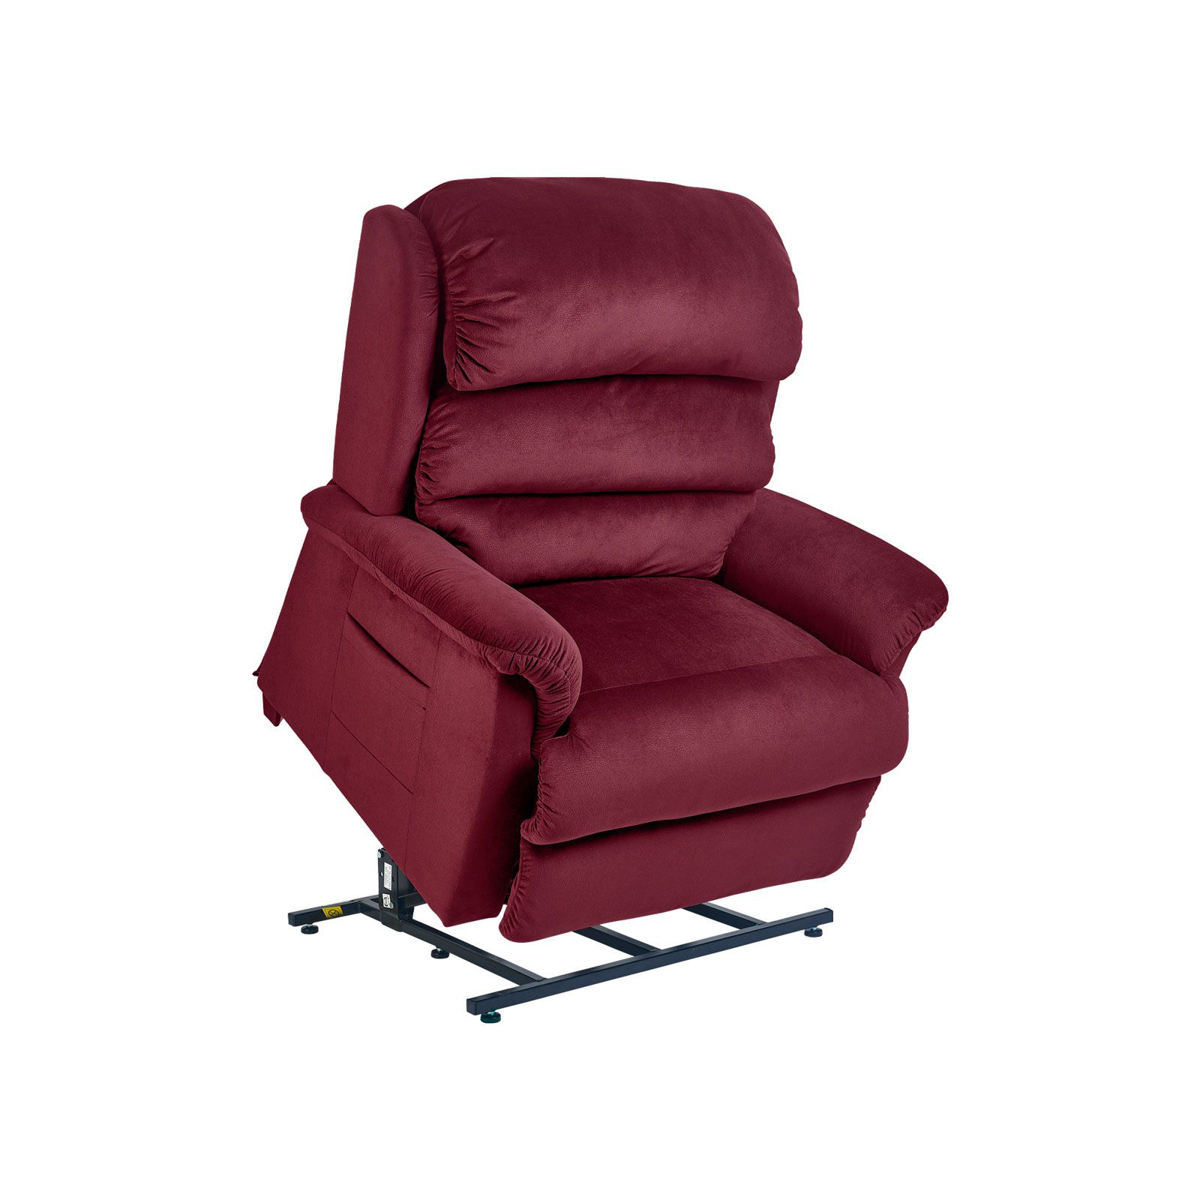 Picture of Polaris Tuscan Small Lift Chair